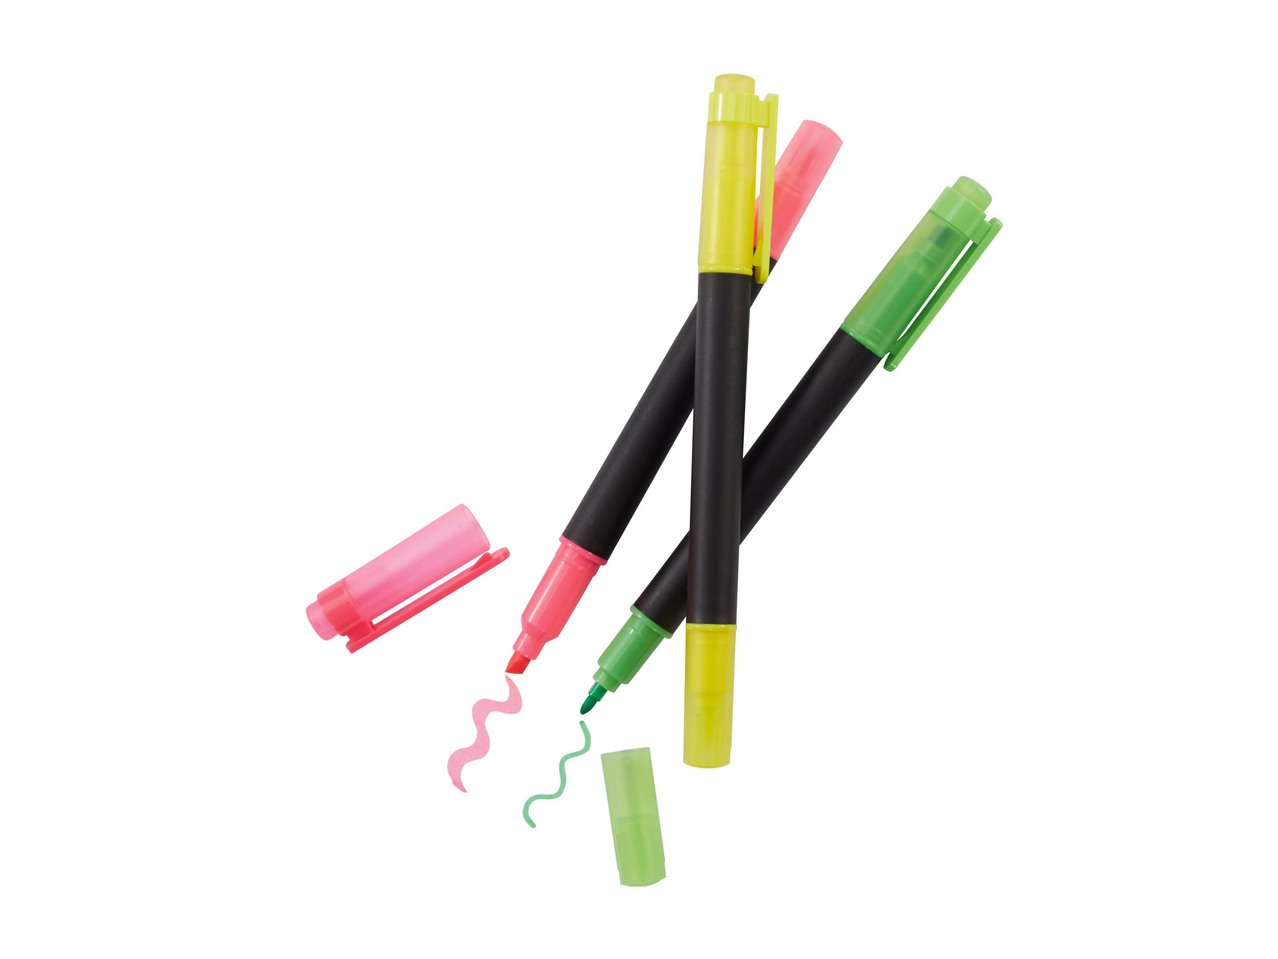 "Neon" Stationery Articles